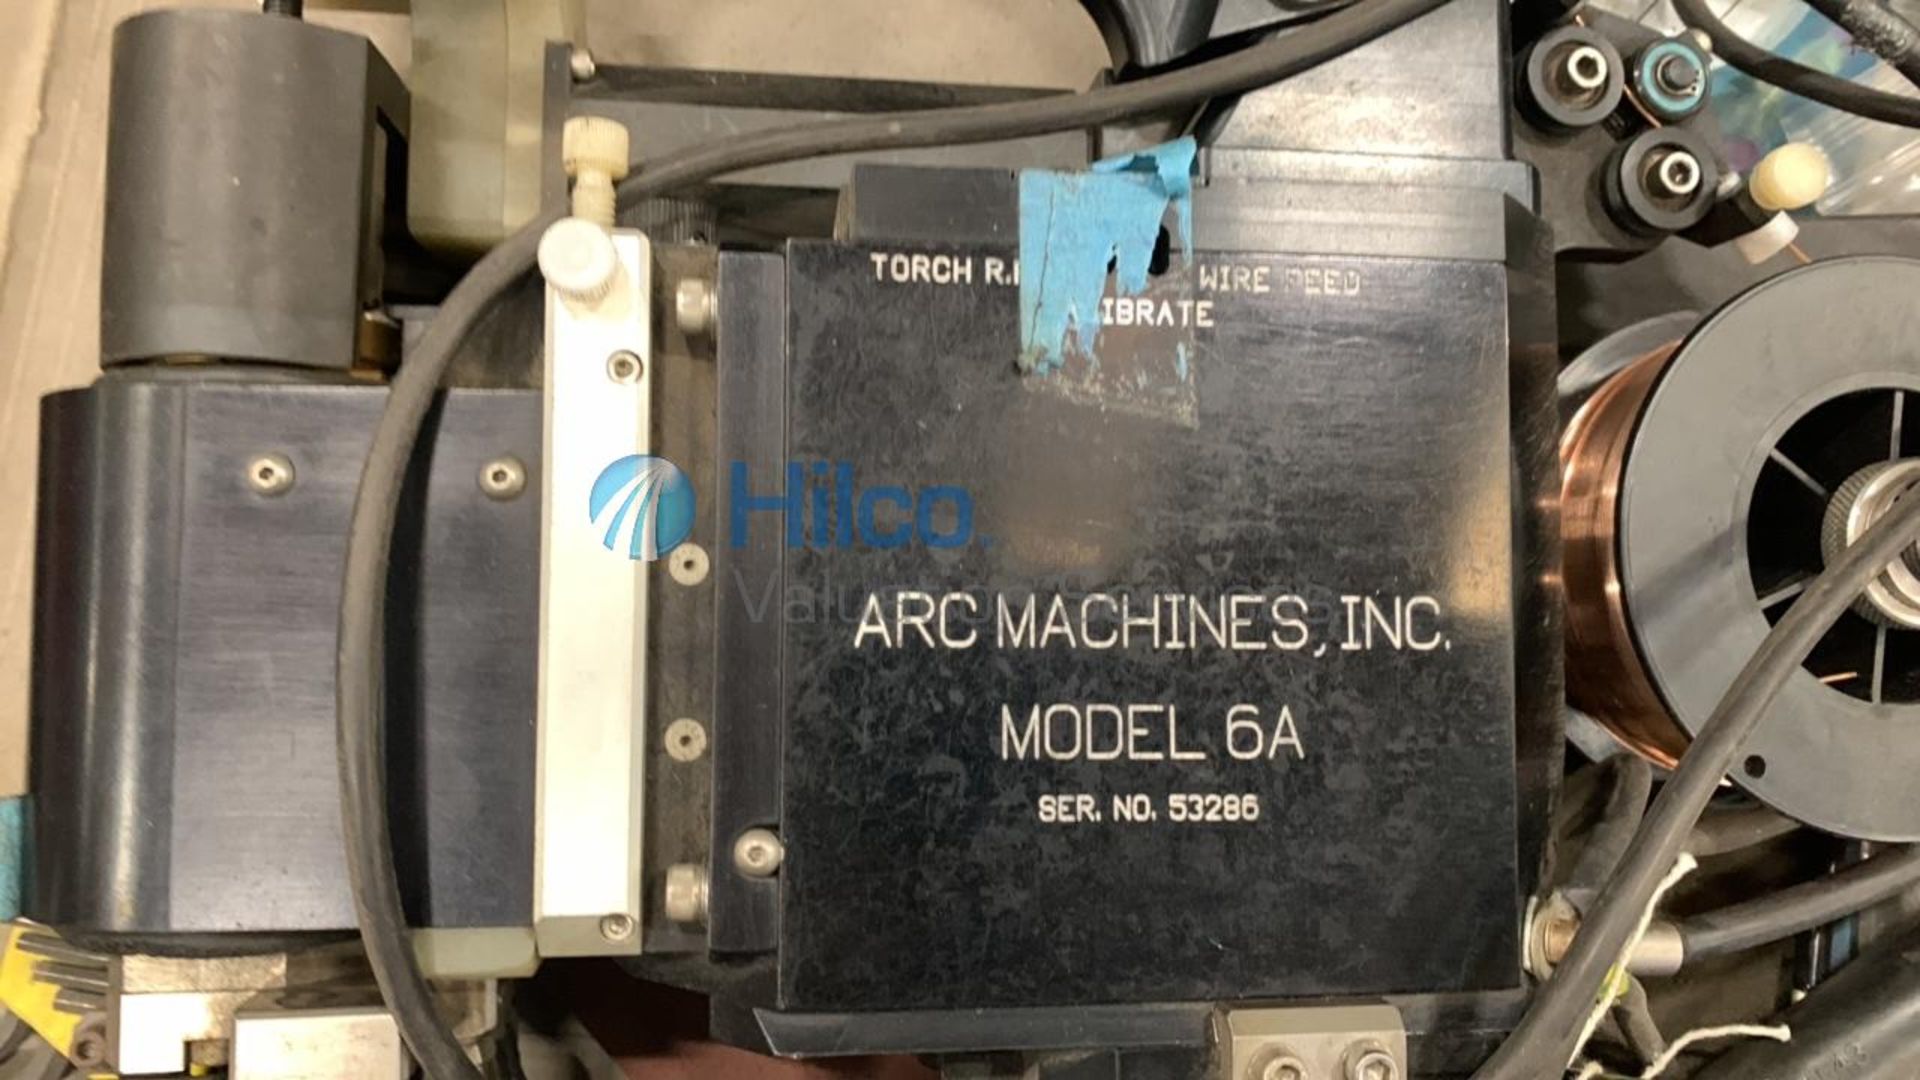 Arc Machines Inc Model 6A Torch & Wire Feed, Serial No. 53286, with Case - Image 2 of 4